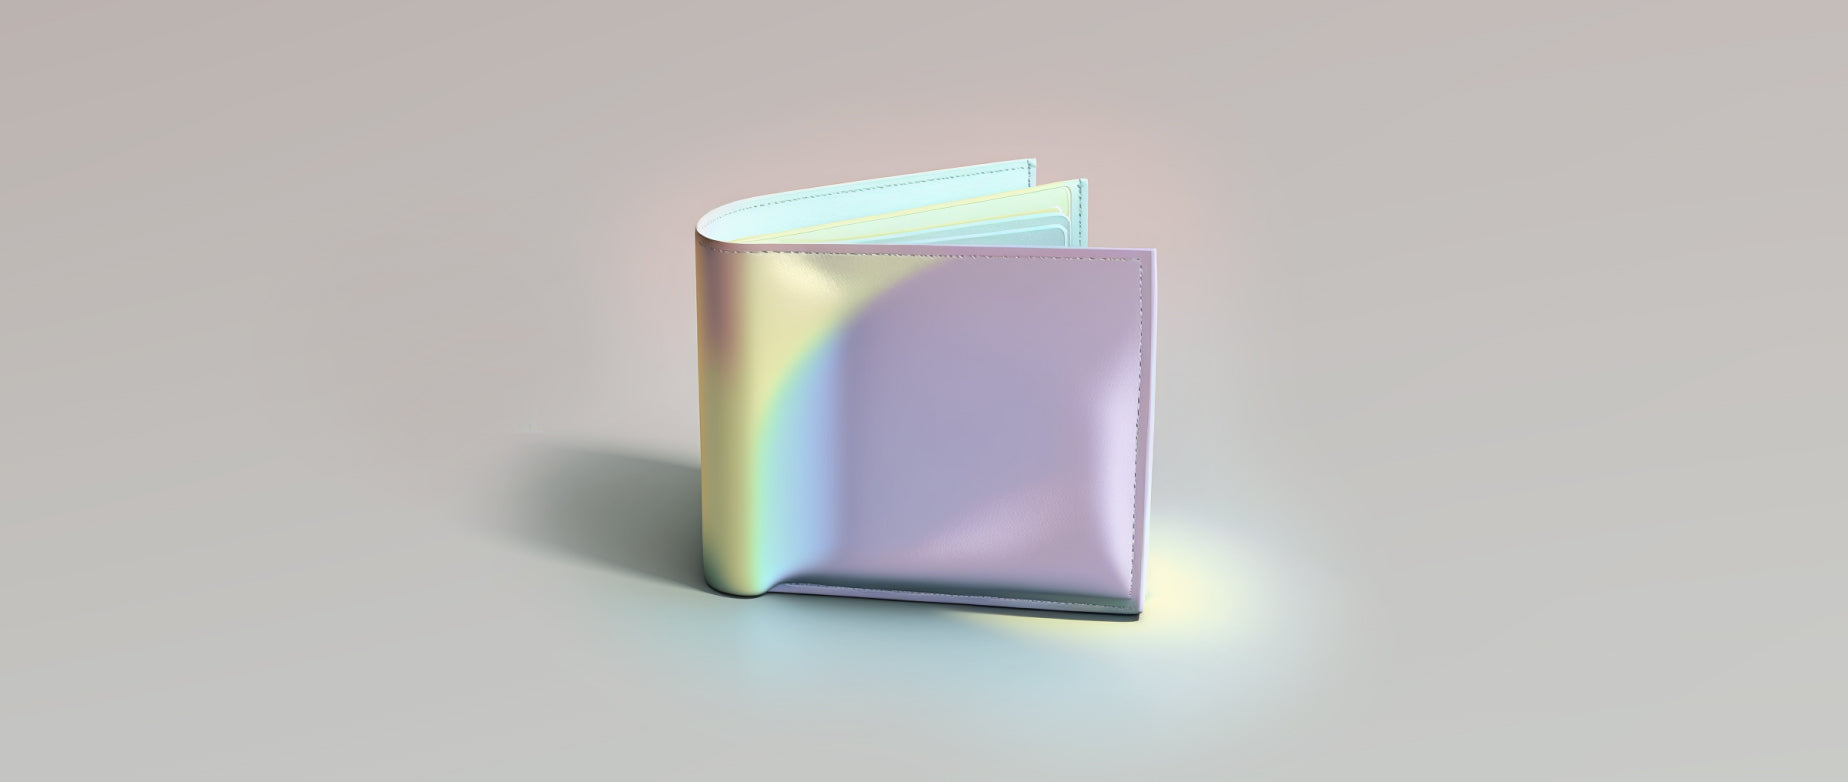 Illustration of a shiny wallet against a grey background